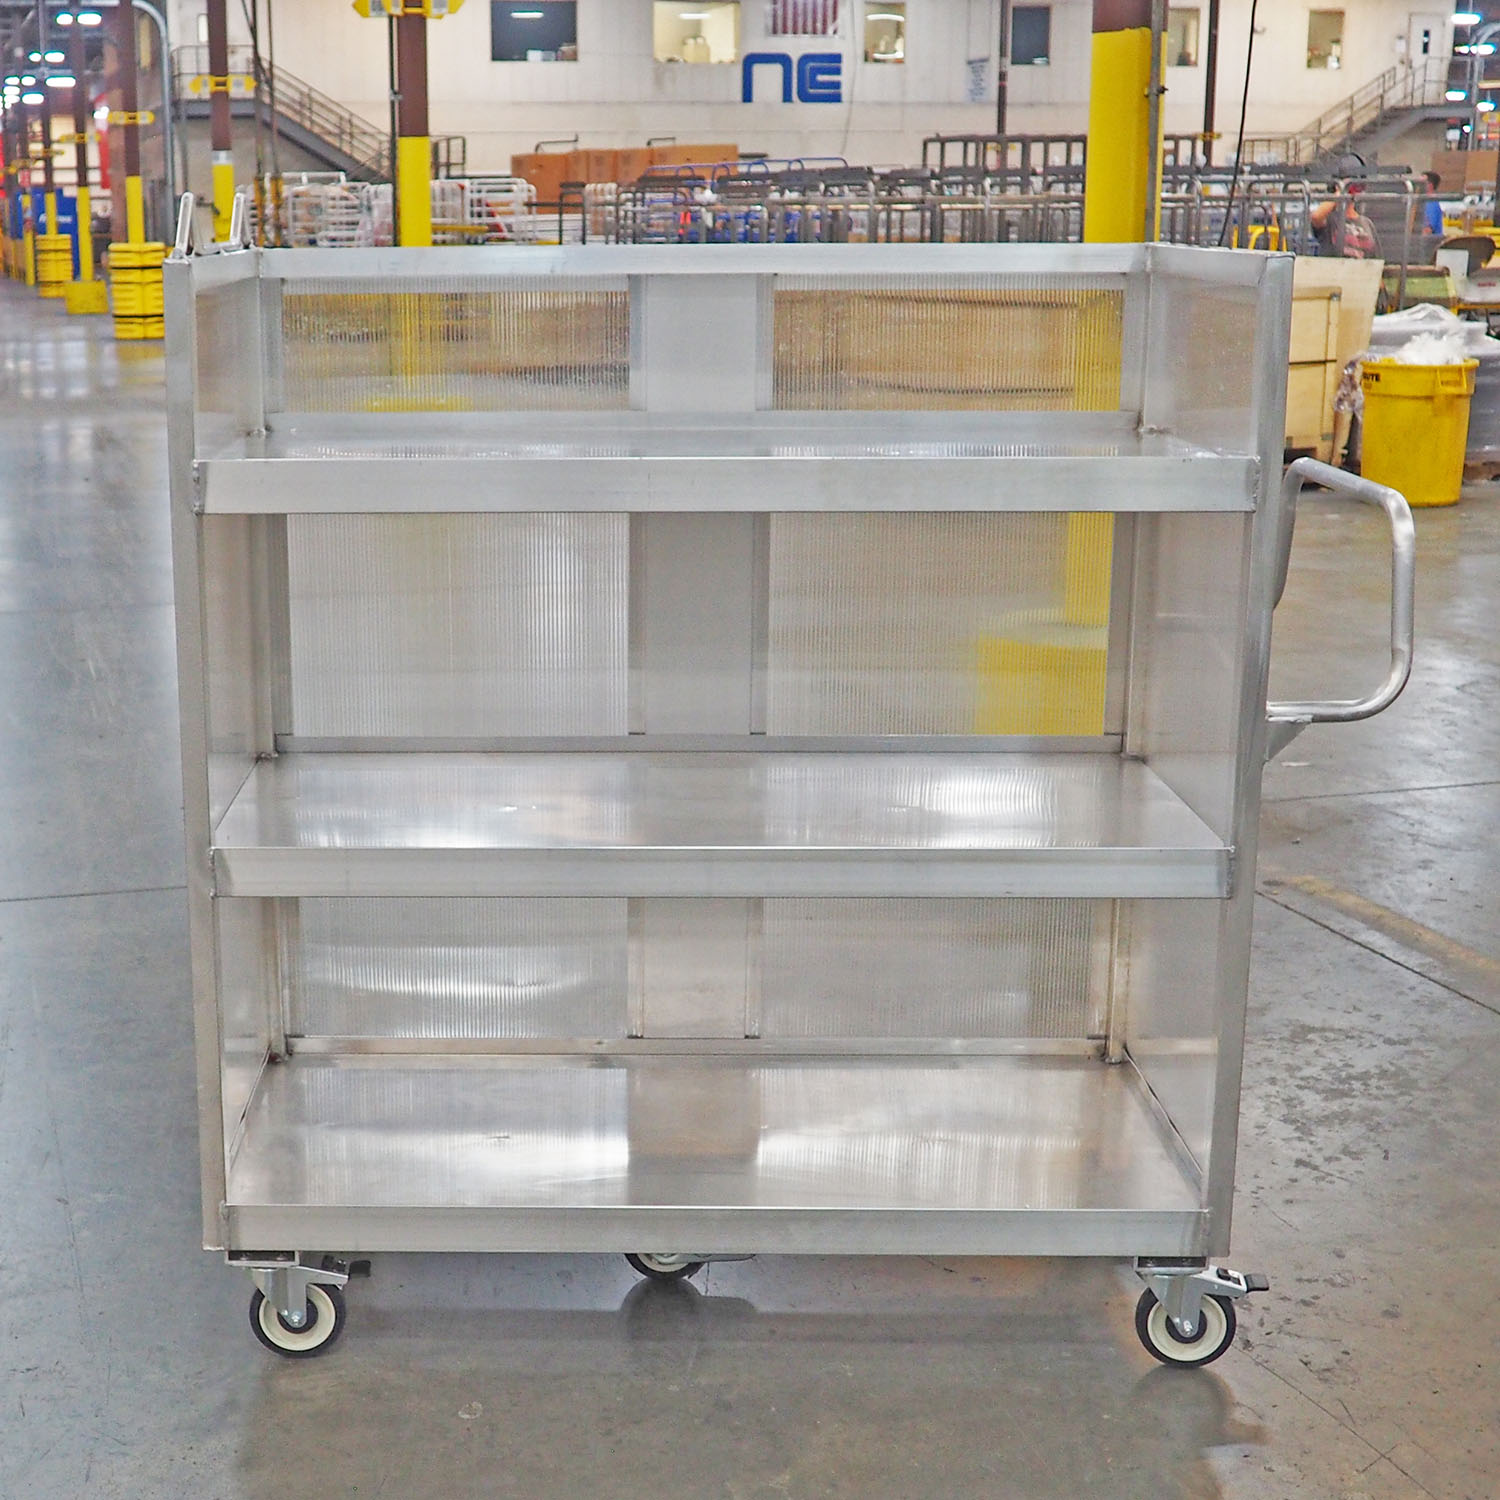 Three clear Sided Aluminum Picking Cart with ergonomic handle and 5 wheel design Utility Cart with 3 Shelves picking cart Three Shelf Distribution Cart picking cart 3 shelf picking cart, 3 shelf Picking Cart, picking cart, ecom cart, ecommerce cart, ecommerce picking cart, picking cart,